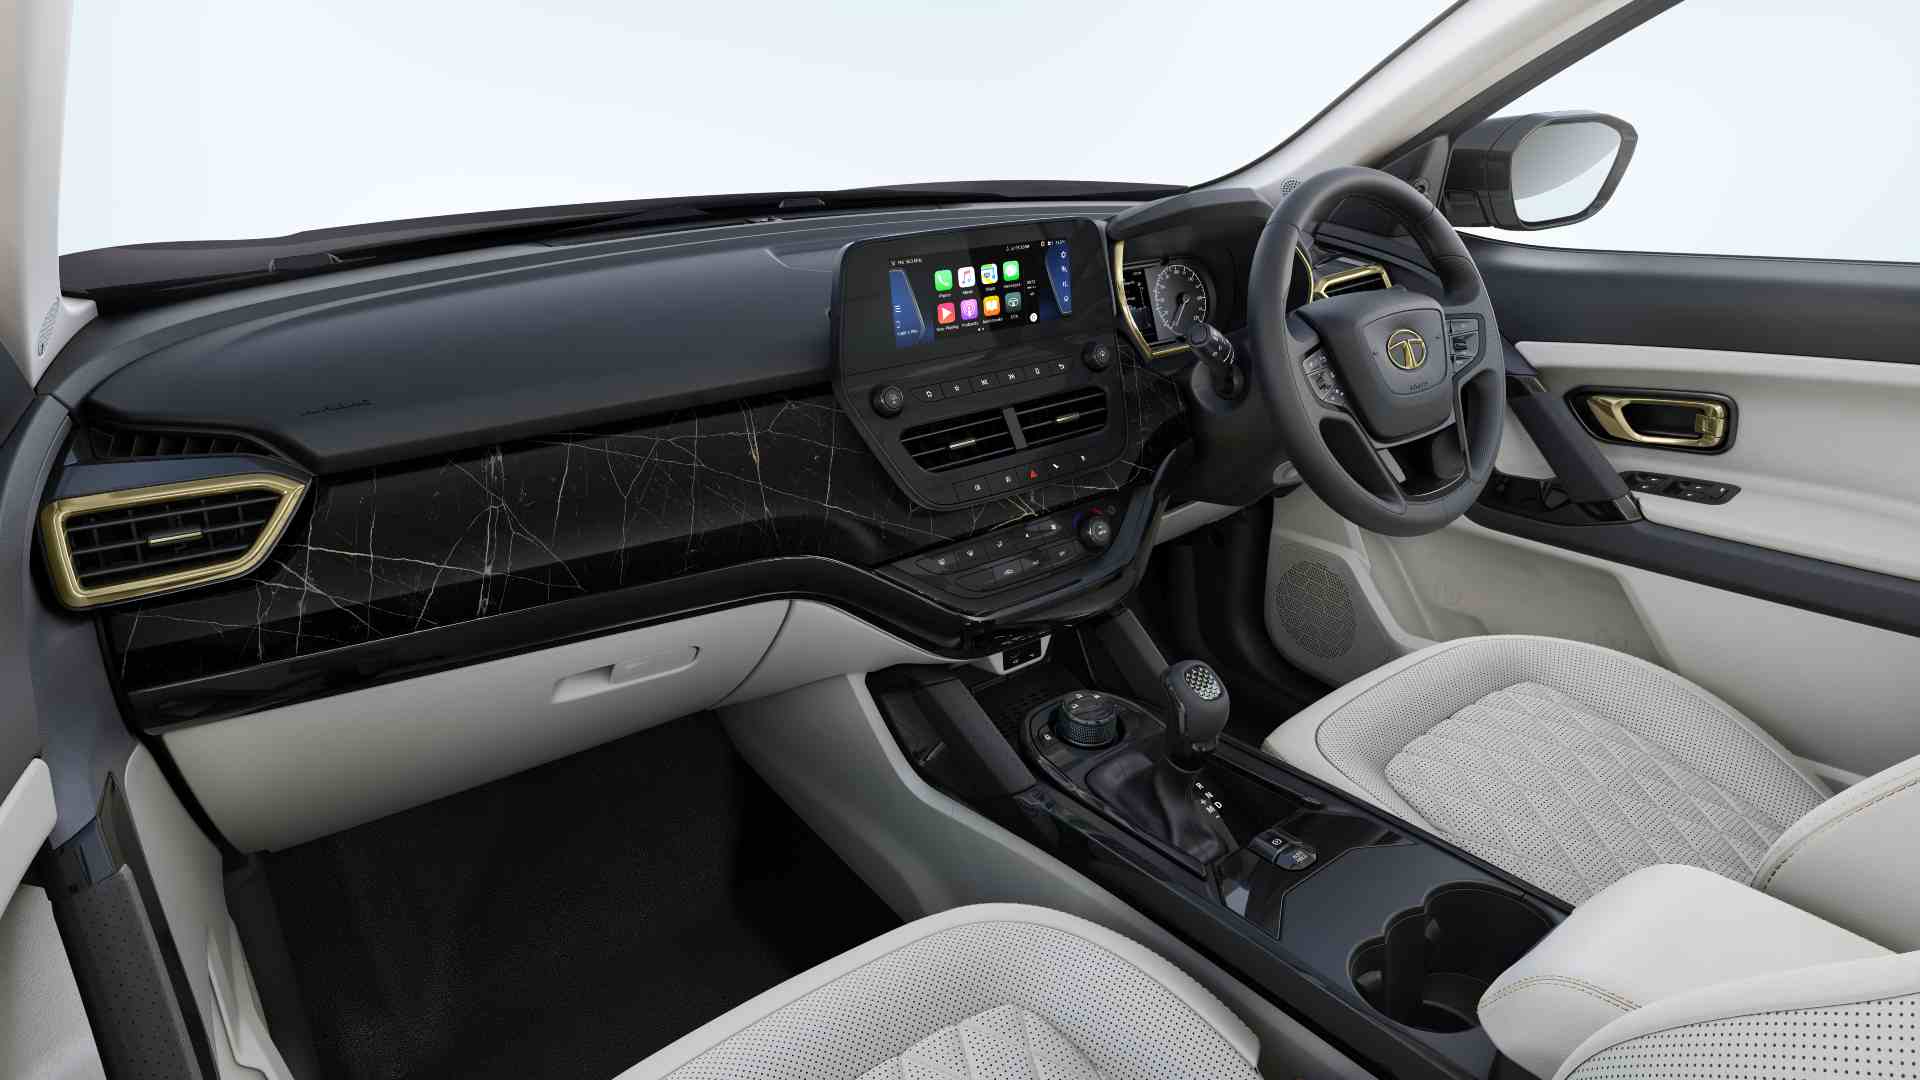 Seat ventilation and wireless Apple CarPlay and Android Auto are the big additions on the inside. Image: Tata Motors